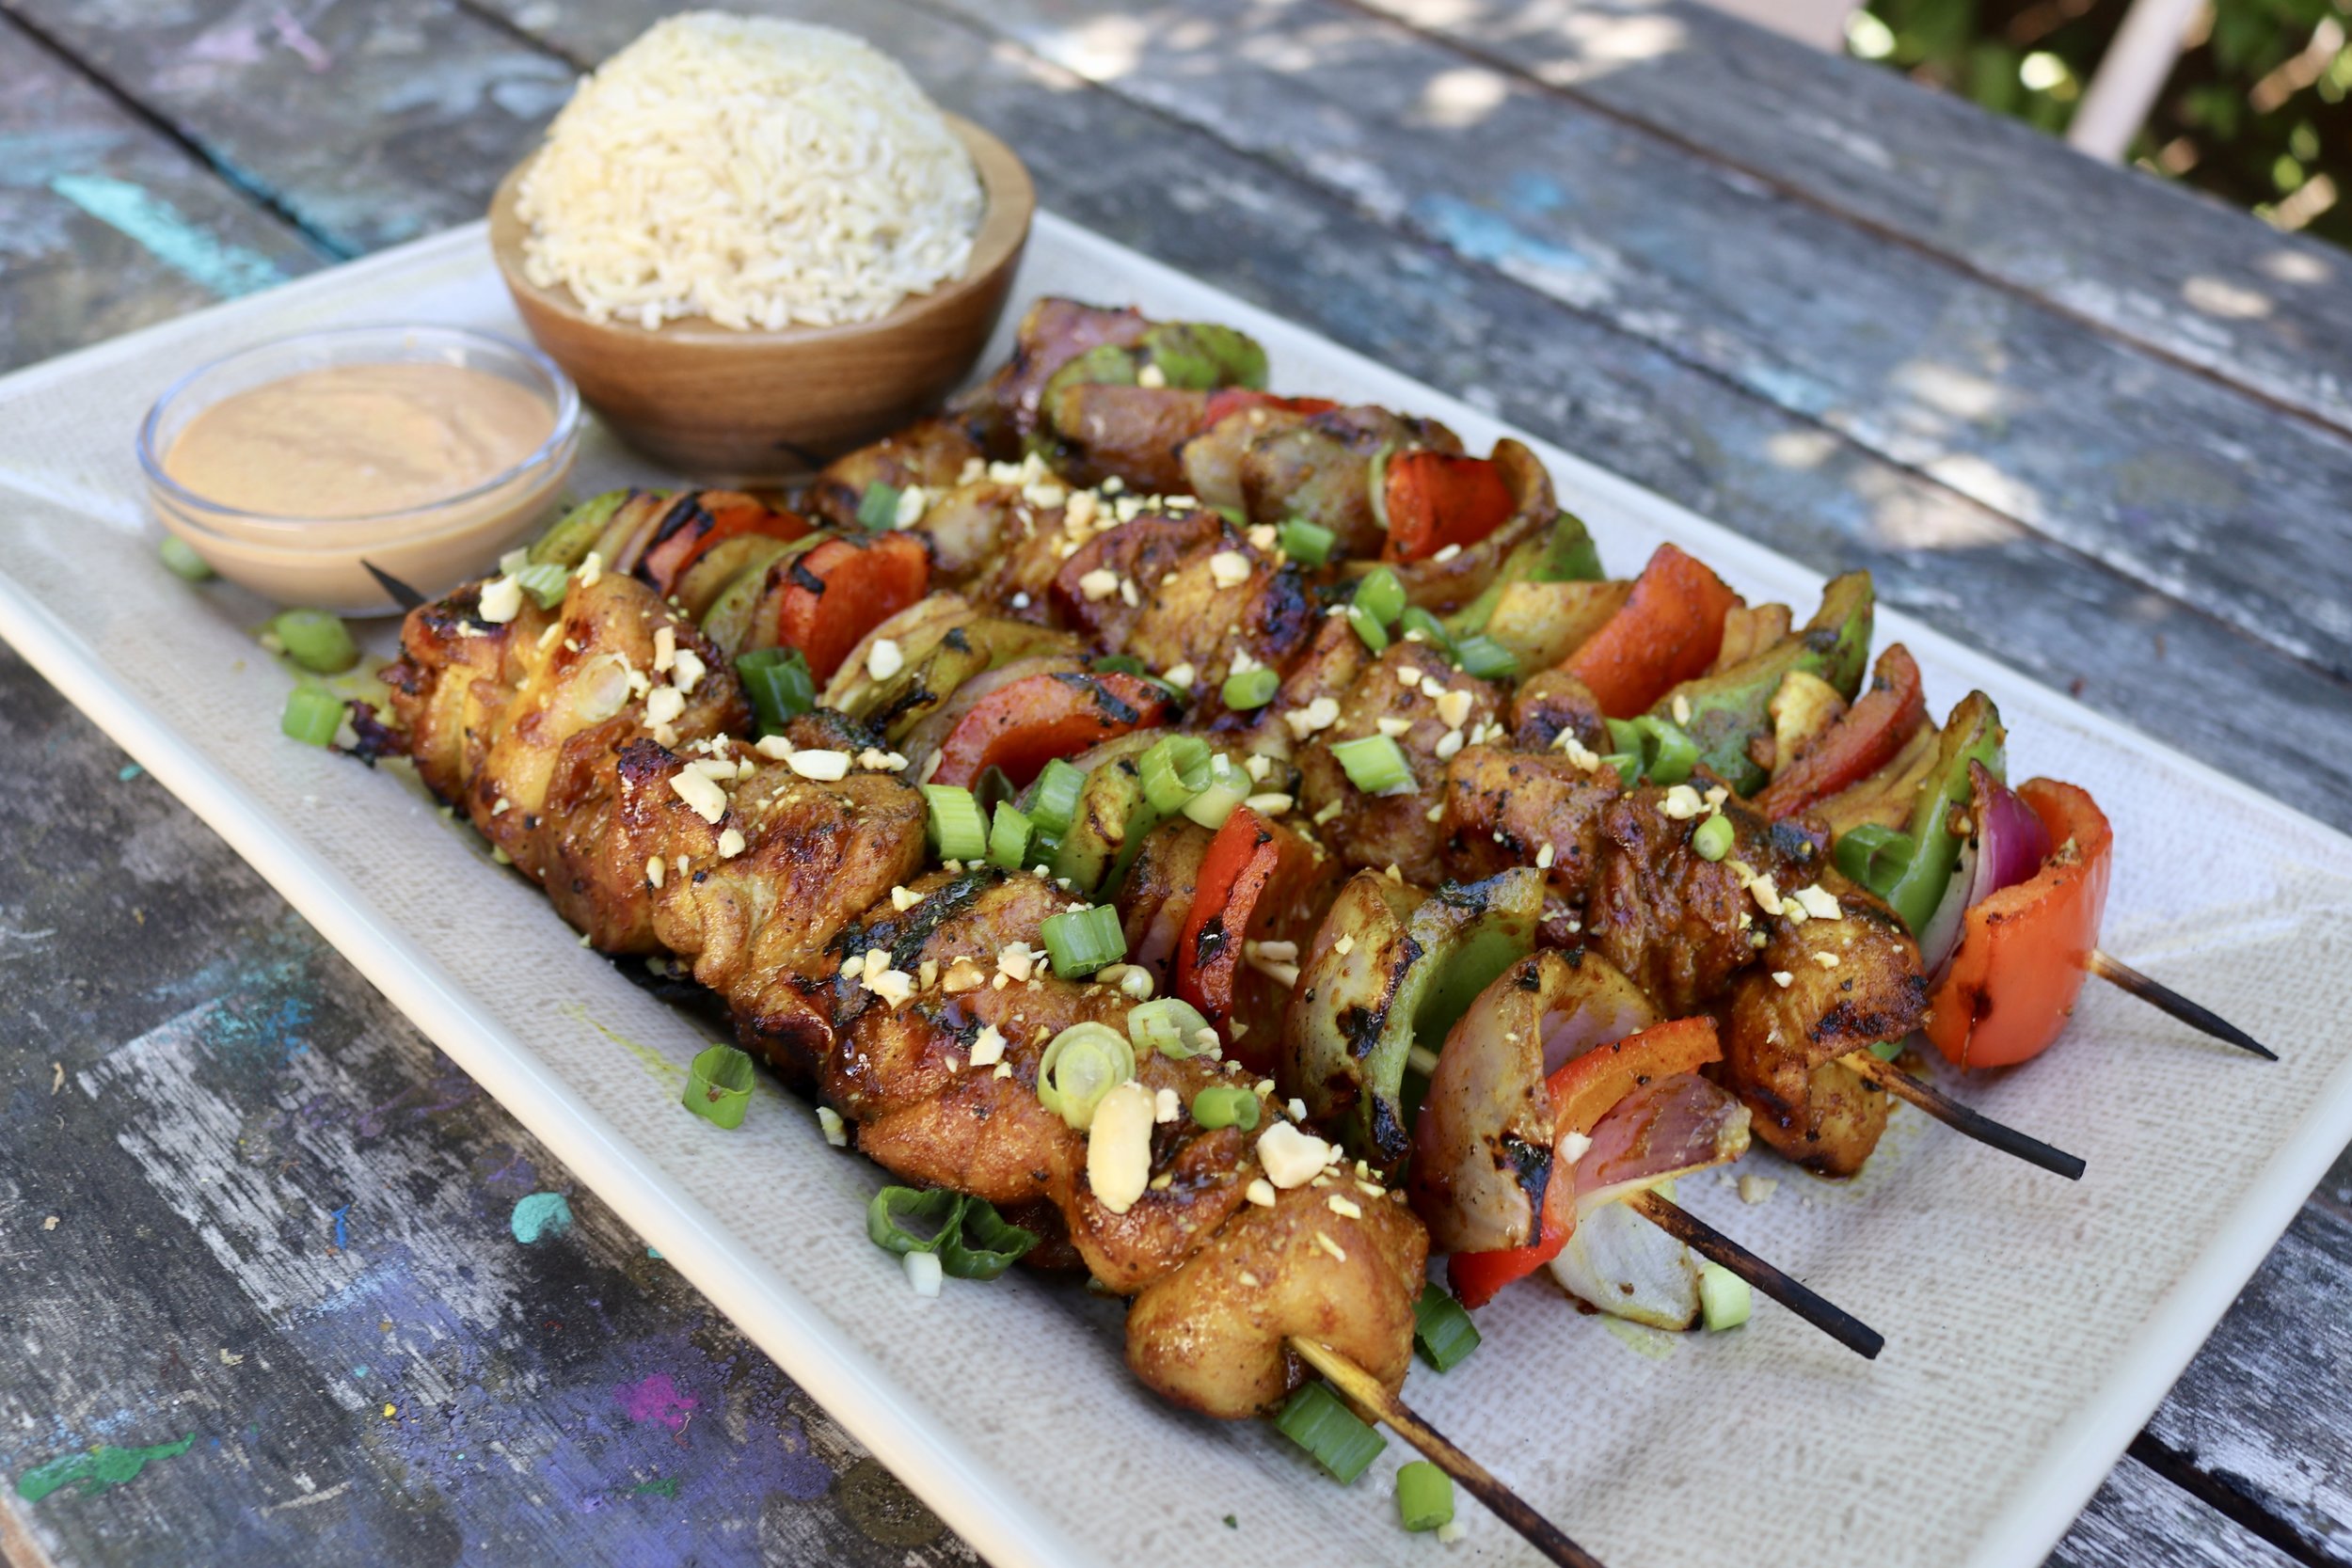 Chicken and Veggie Skewers With Peanut Sauce